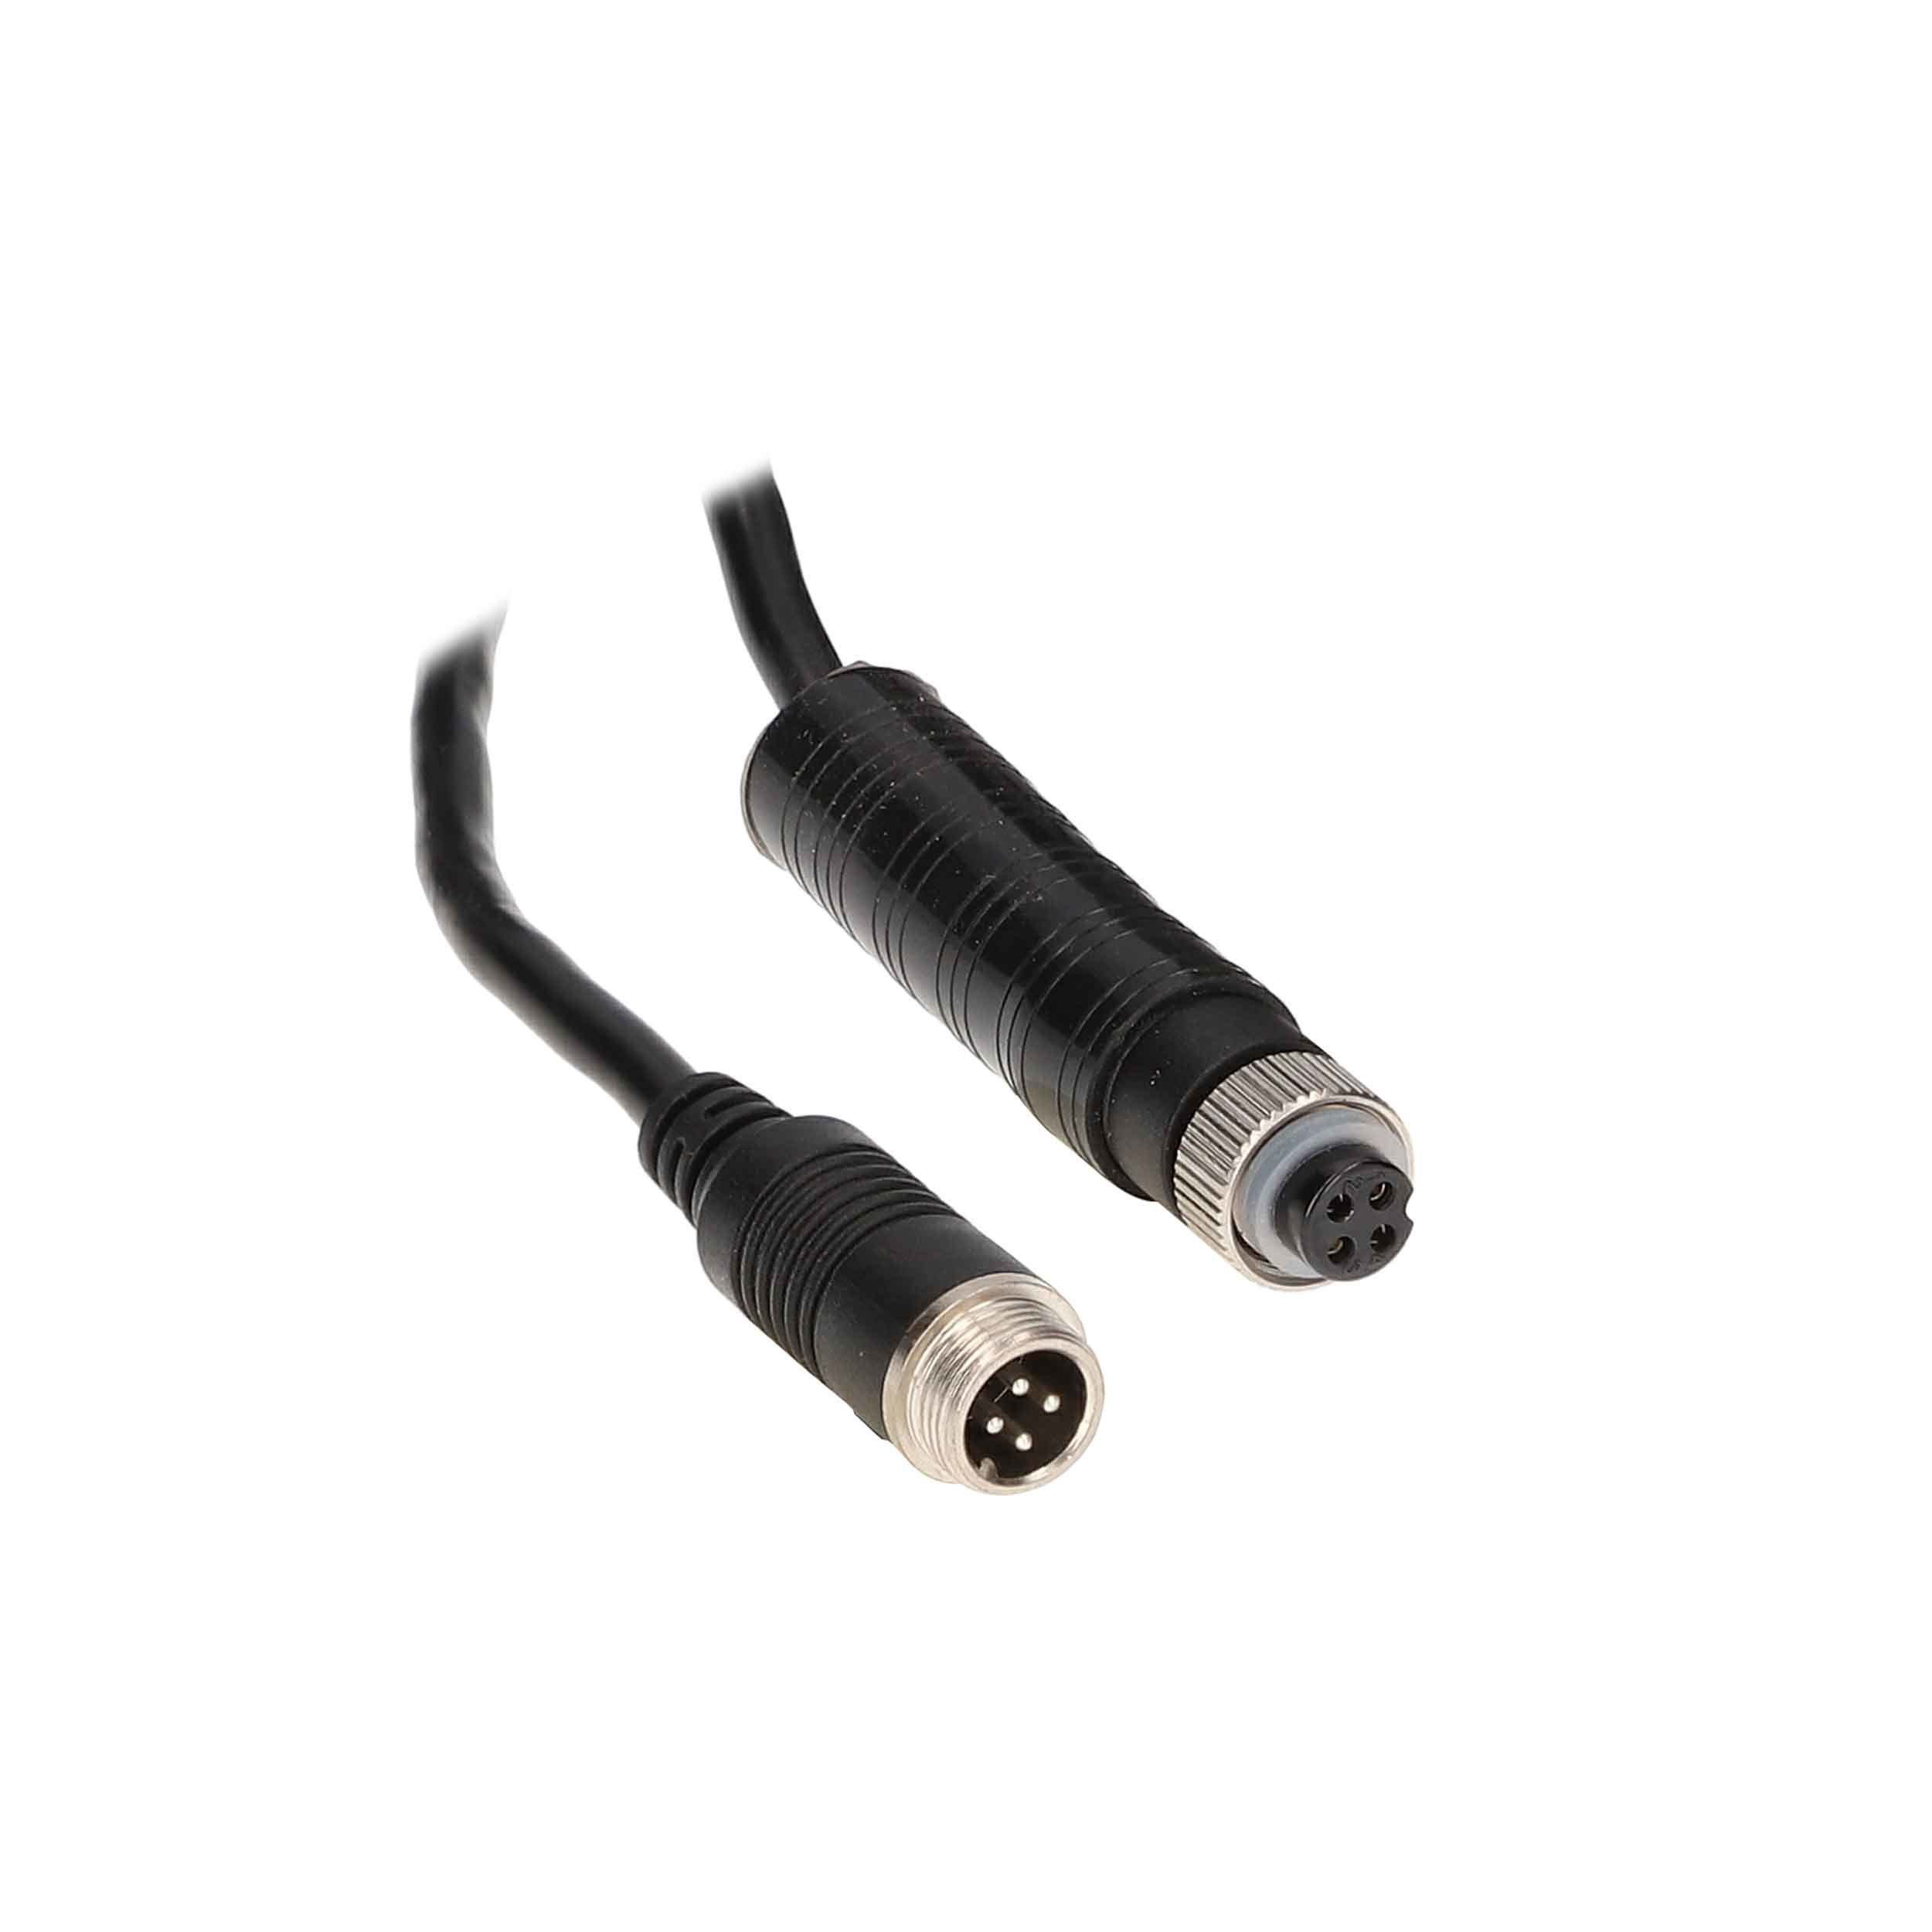 HD 4 Pin DIN Cable Extension Cable - 10 Meters